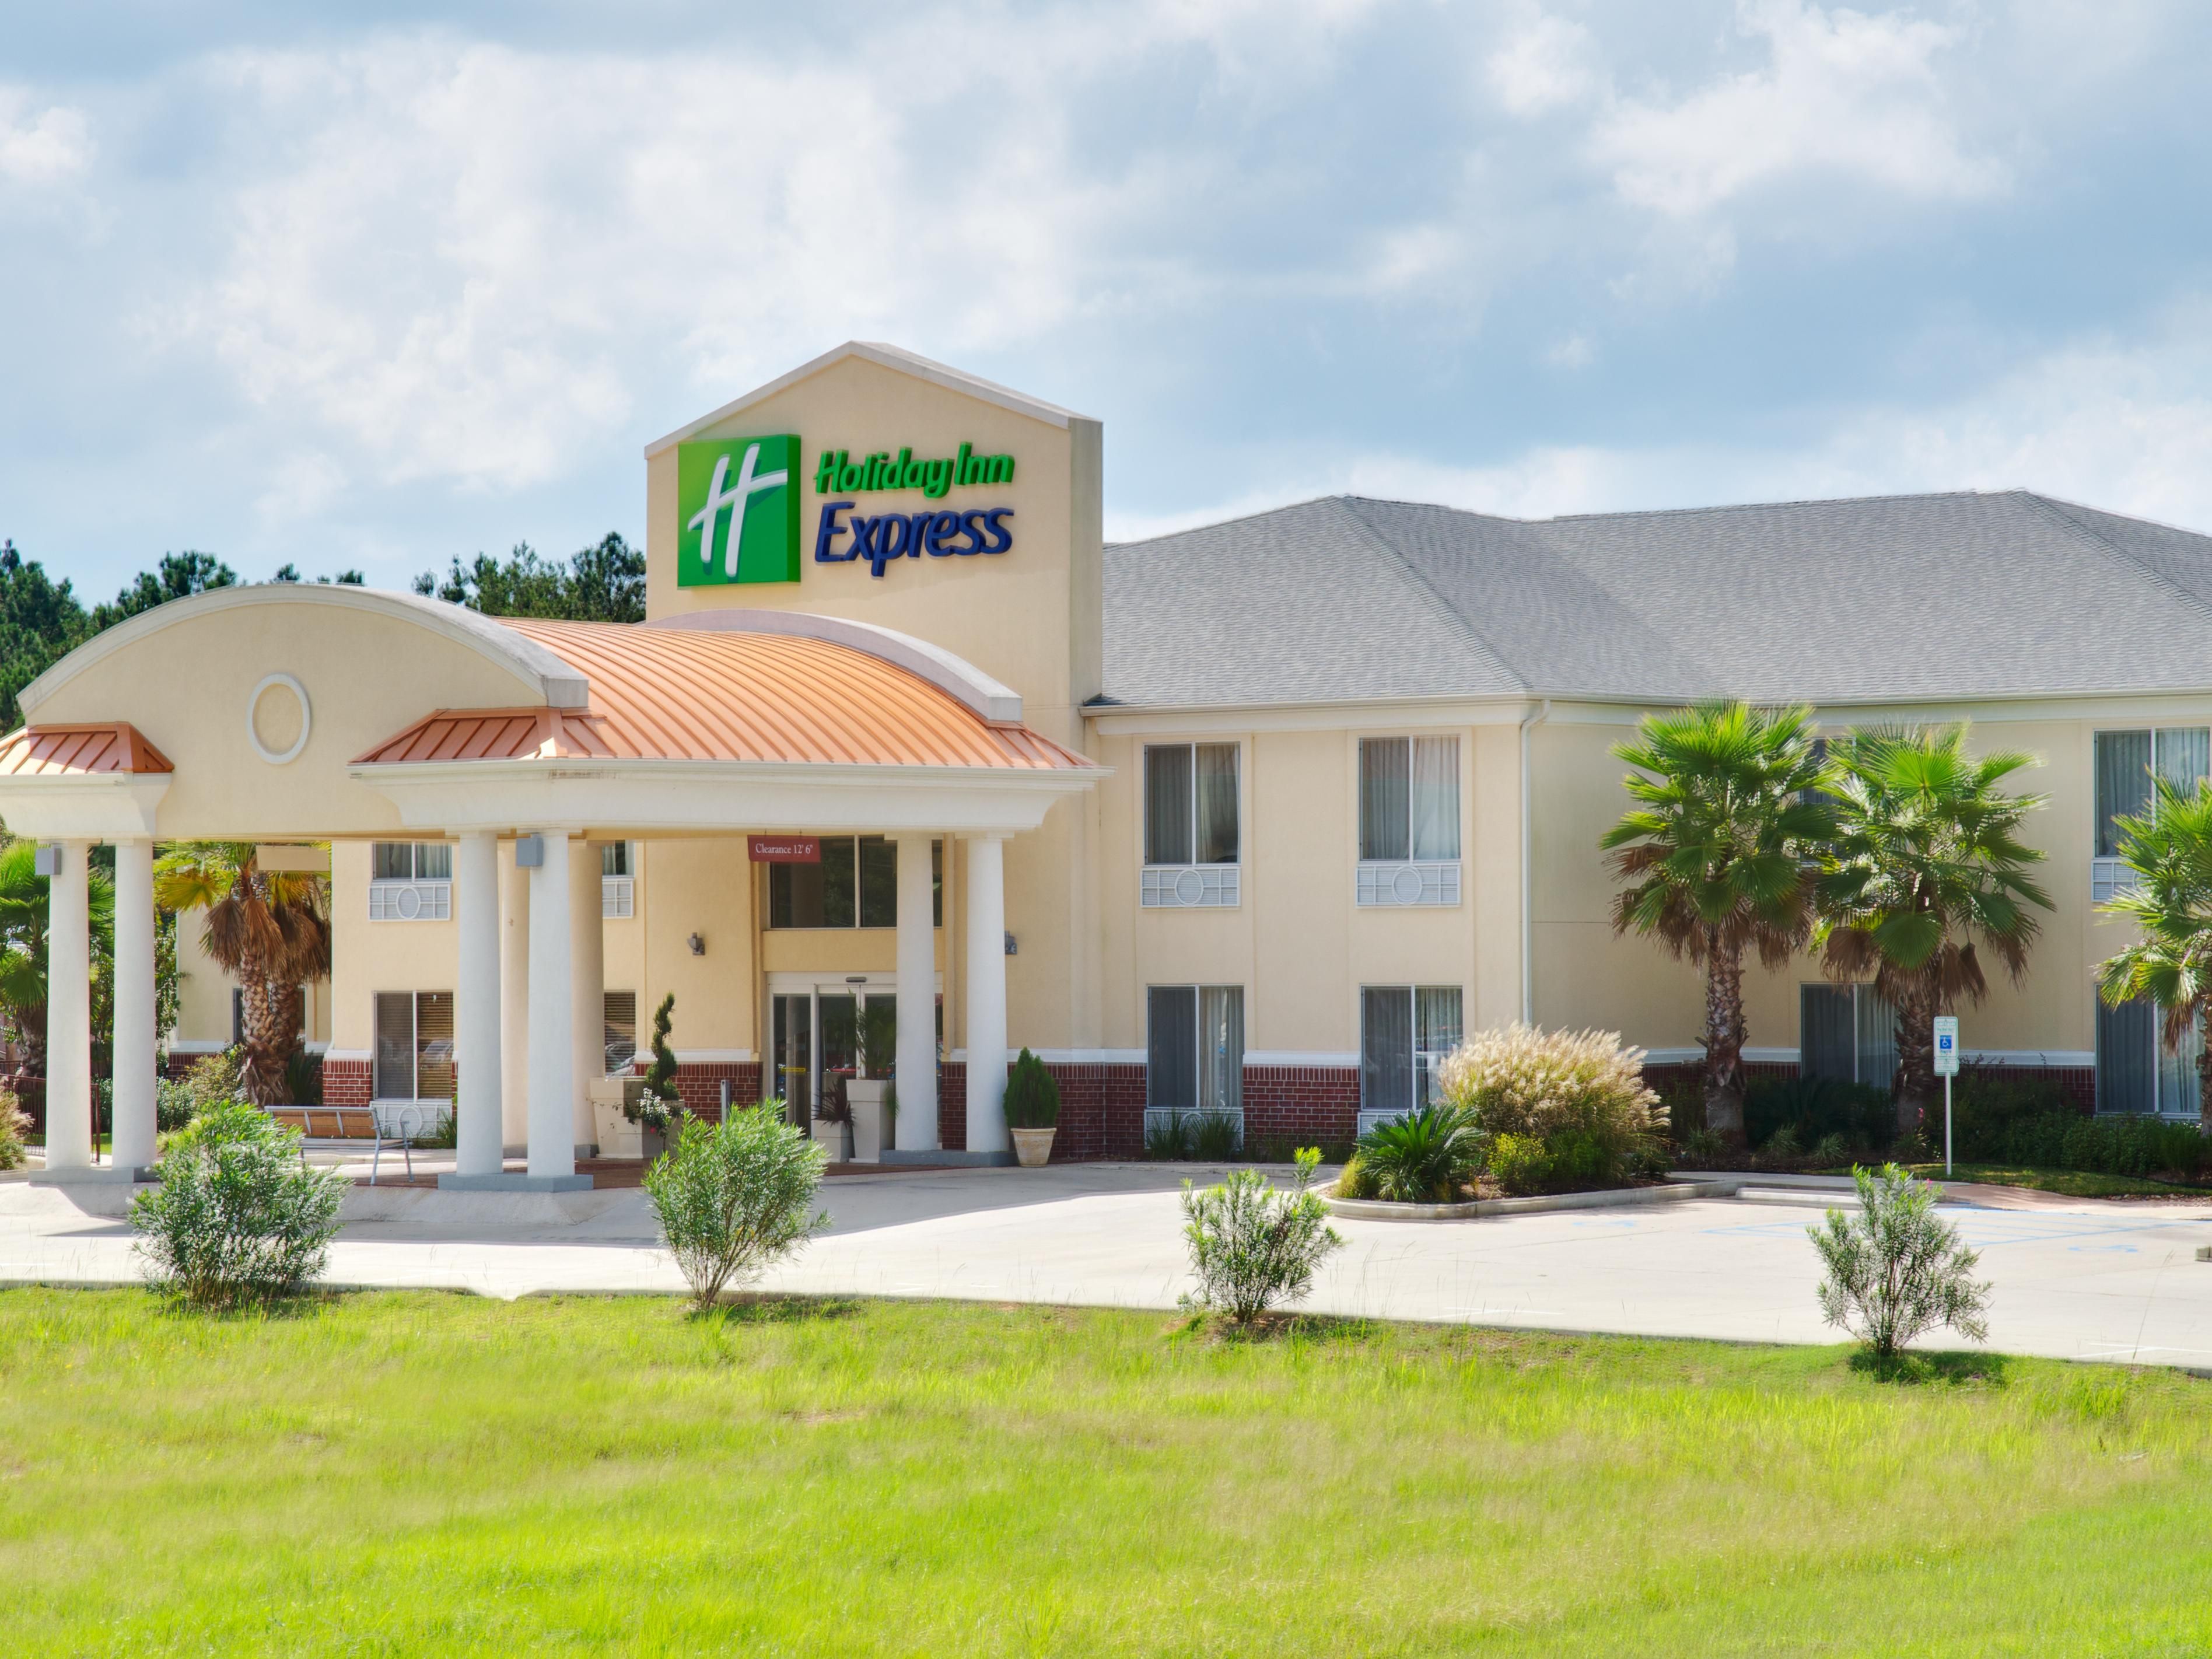 Polk Hotel - Holiday Inn Express Leesville-Ft. Polk Hotel in Leesville, Louisiana ... - Official site of Holiday Inn Express Leesville-Ft. Polk. Stay Smart, rest, and   recharge at Holiday Inn Express - Best Price Guarantee.